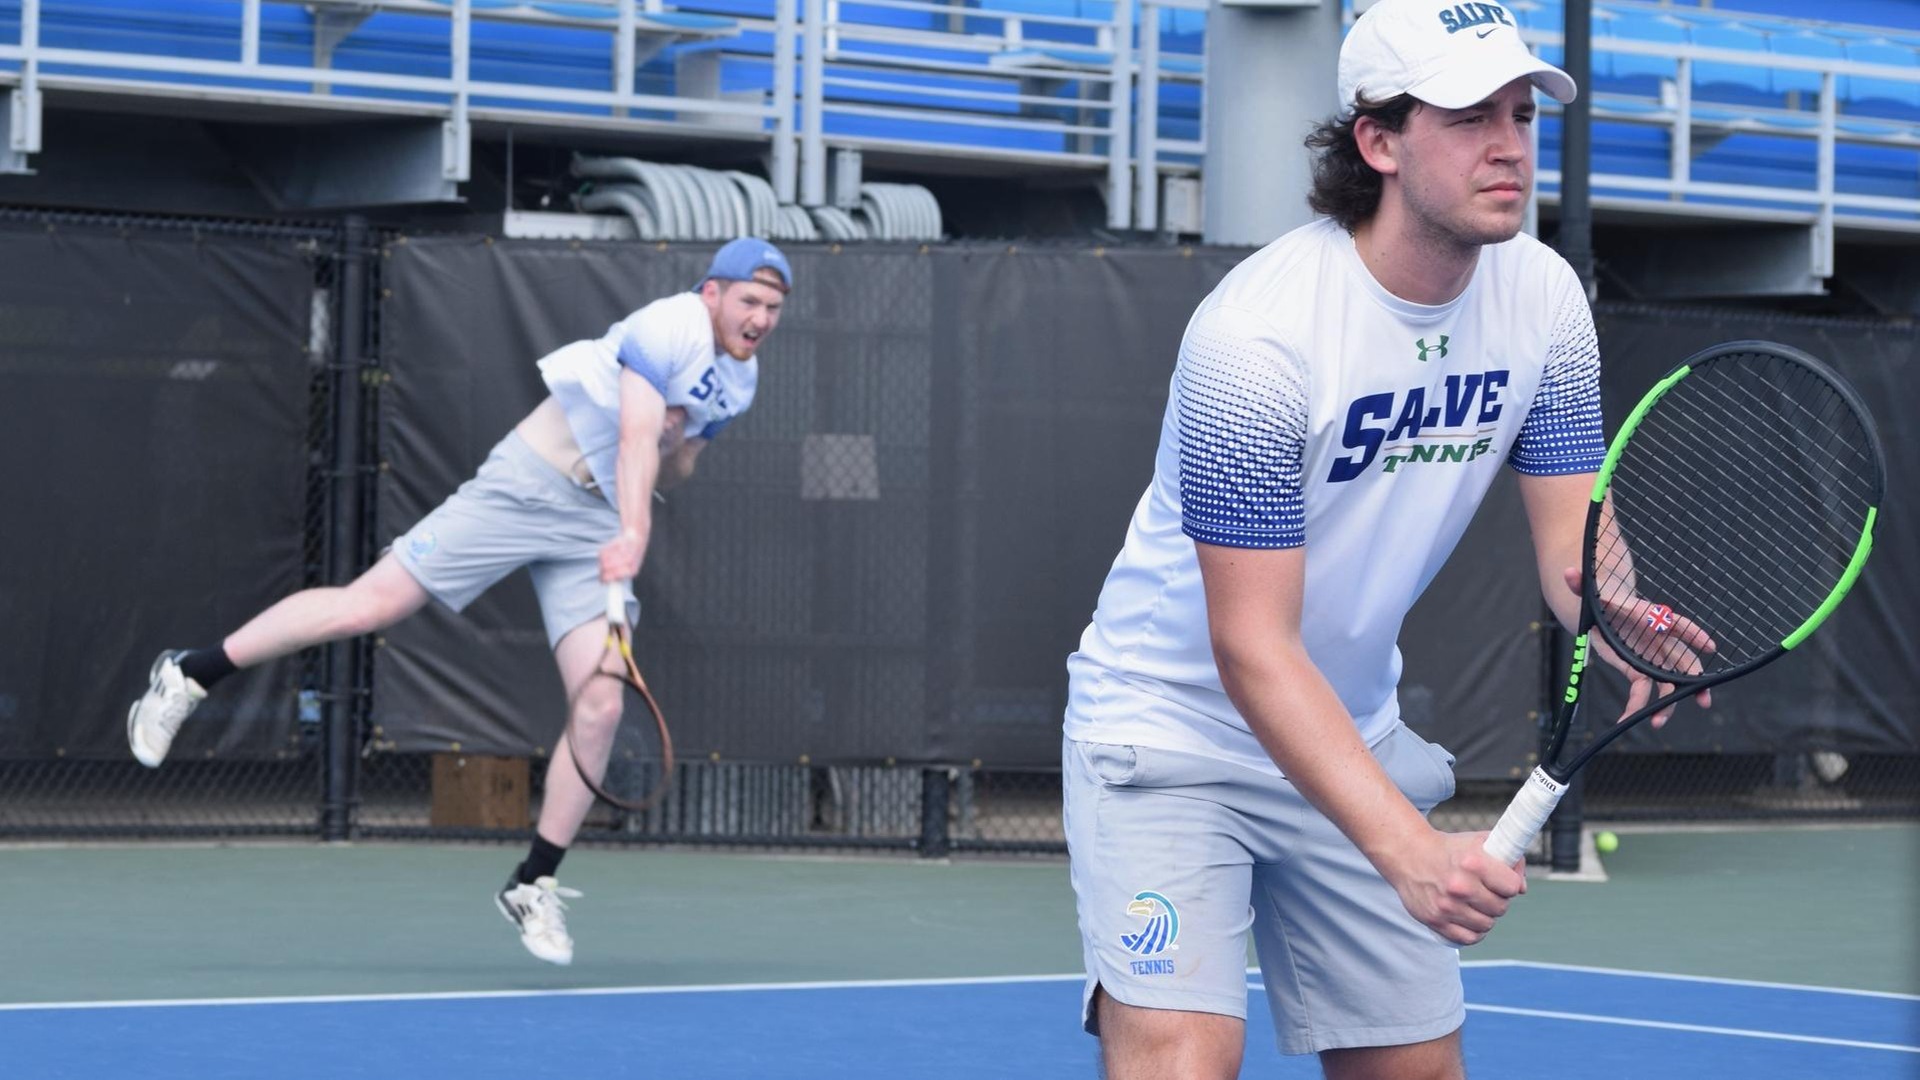 Jacob Faulise (serving in background) and Ned Batstone competed with different partners against the Lyons. (Photo by Ed Habershaw '03M)